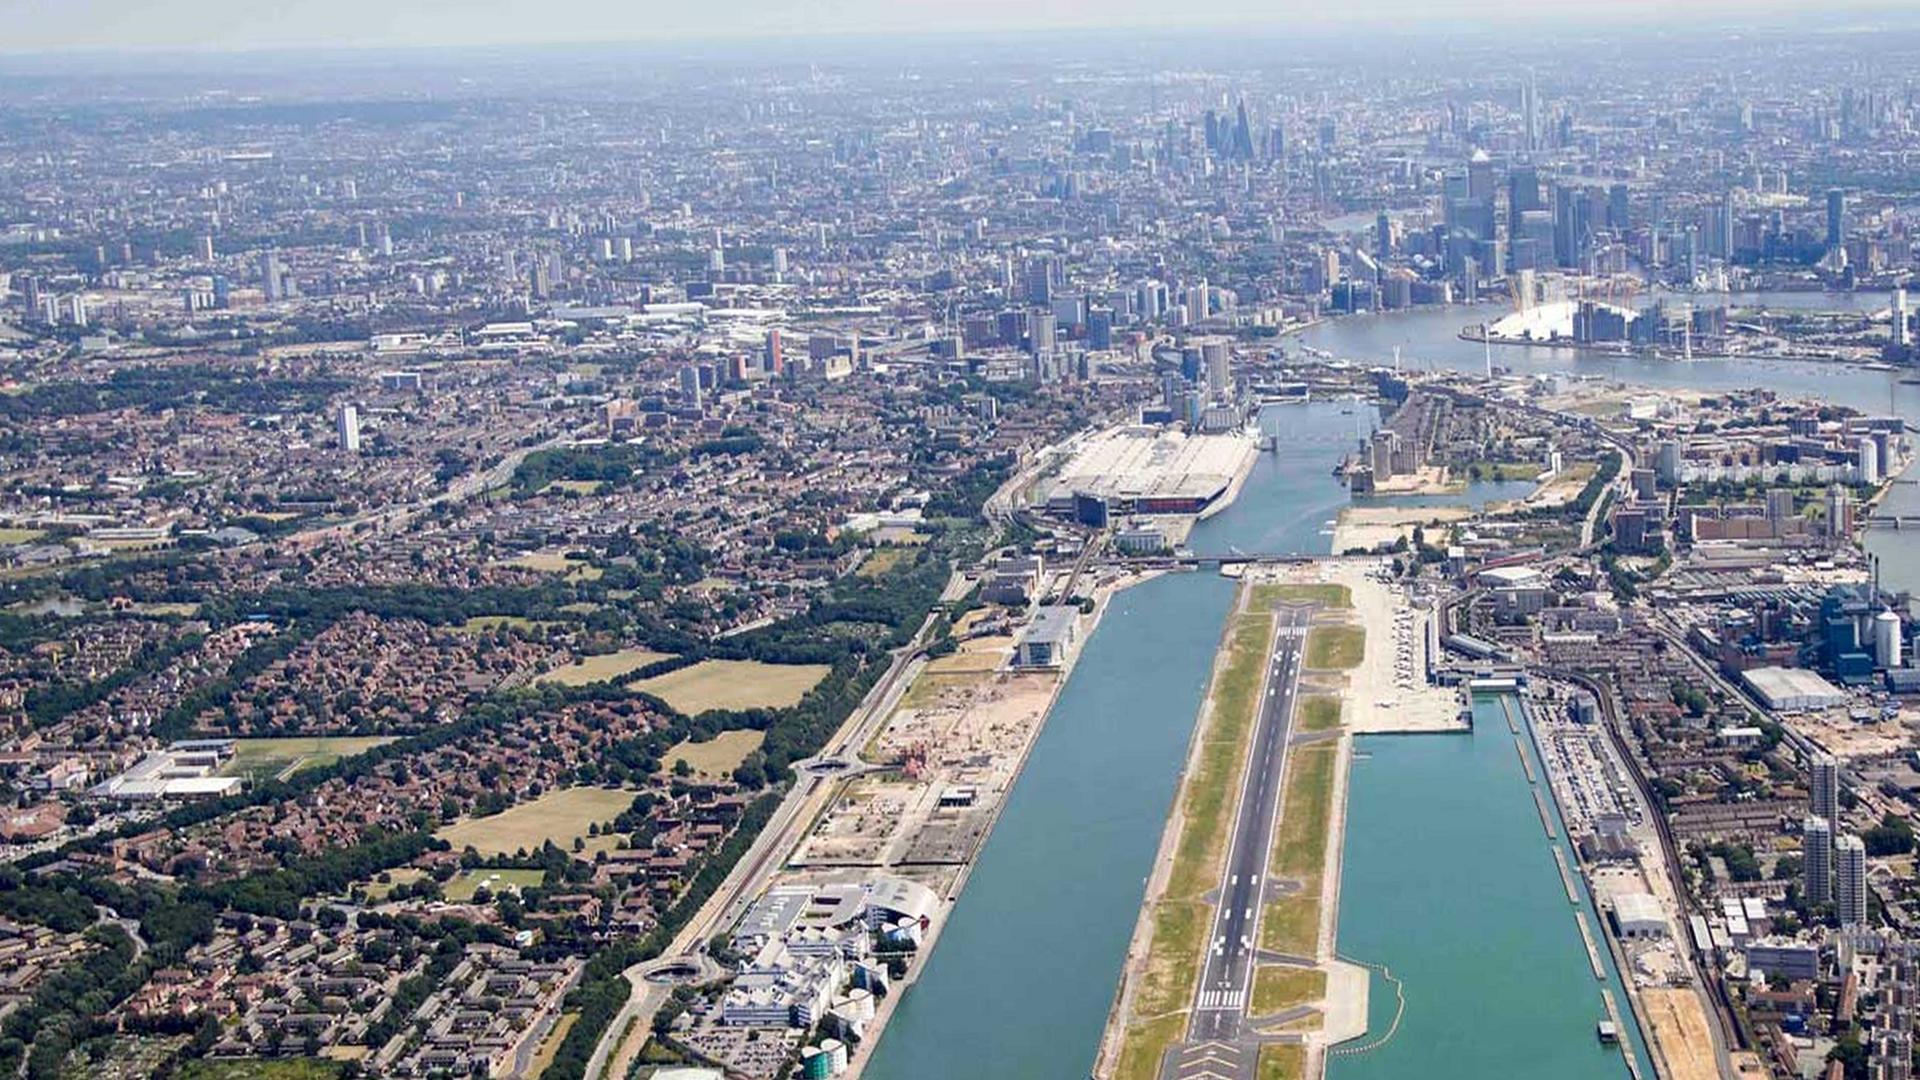 The London City Airport Information